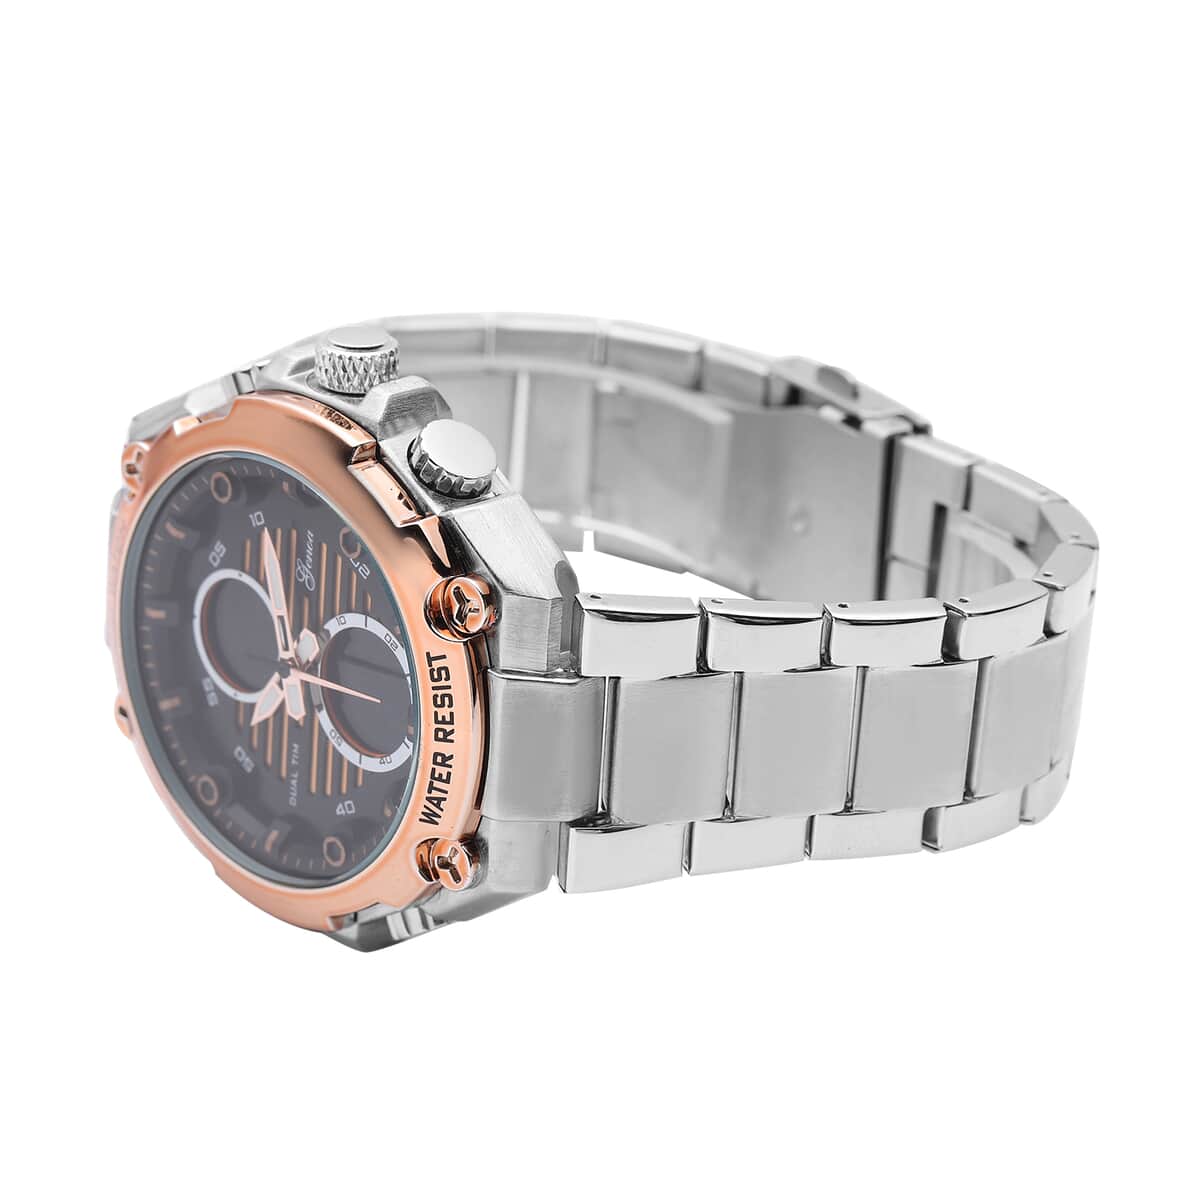 Genoa Japanese and Electronic Movement Multifunctional Key Rosegold Dial Watch in Stainless Steel Strap image number 4